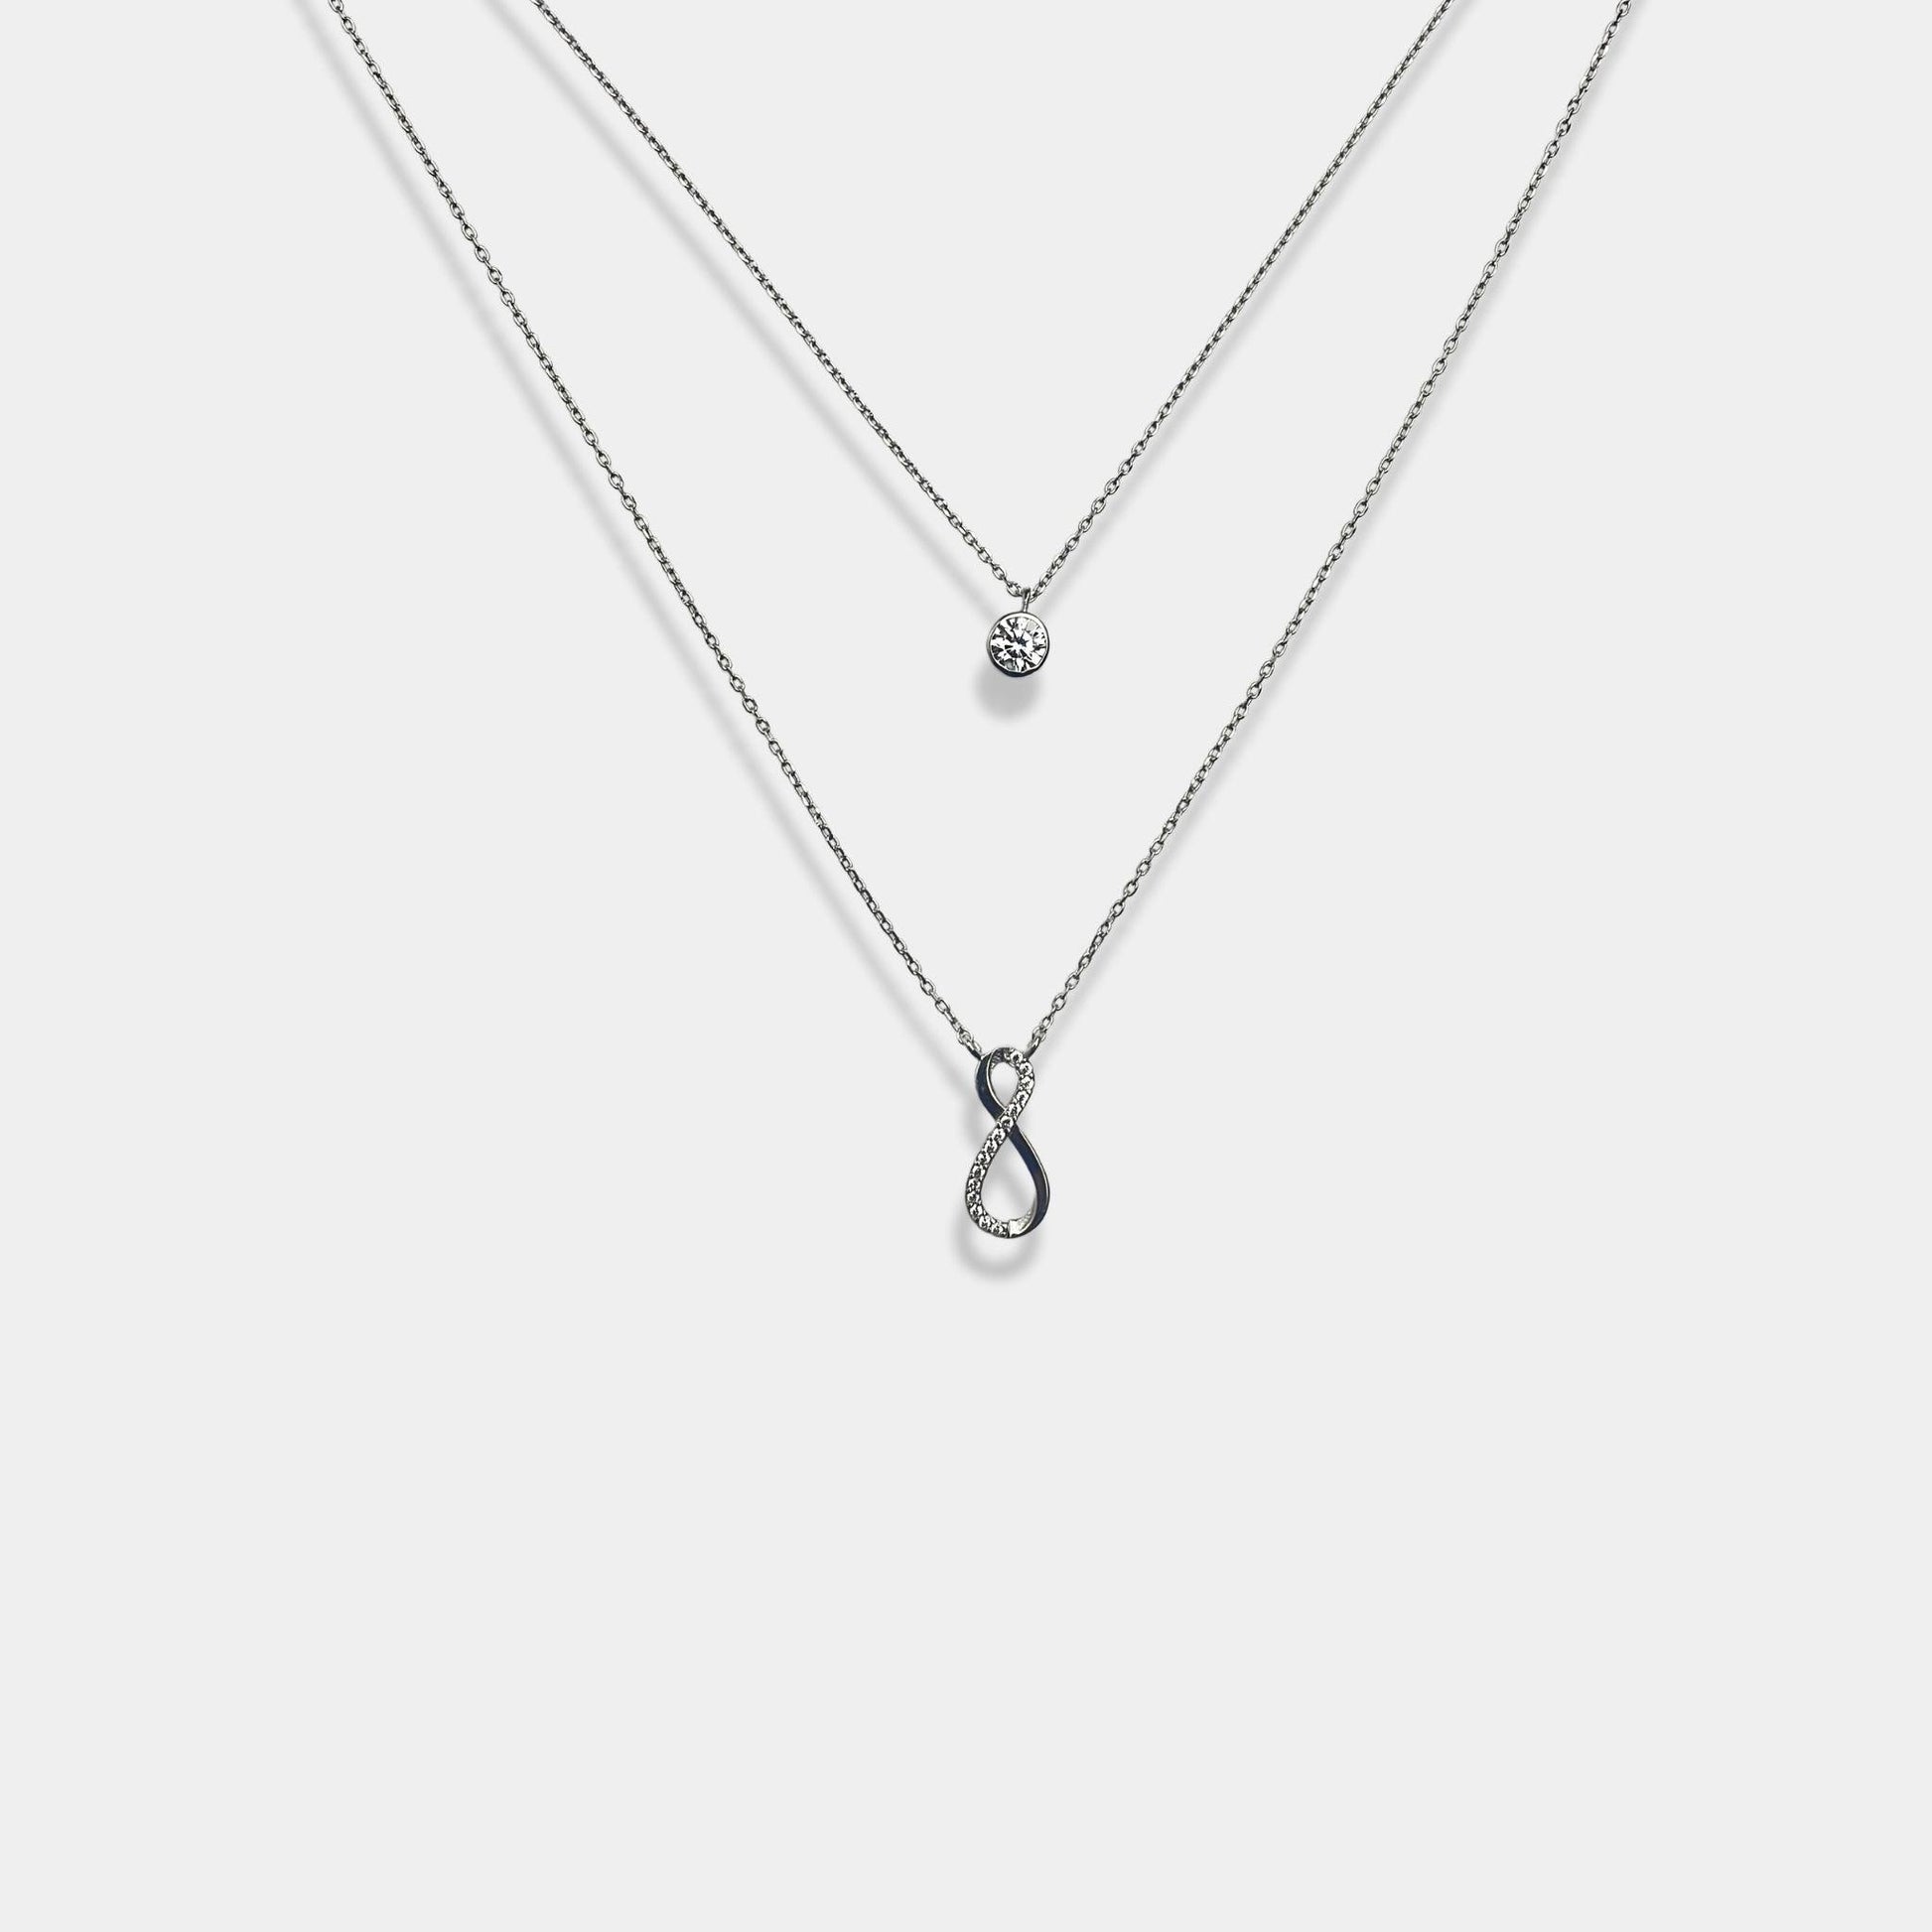 A stunning sterling silver necklace infinity symbol, symbolizing eternal love and beauty